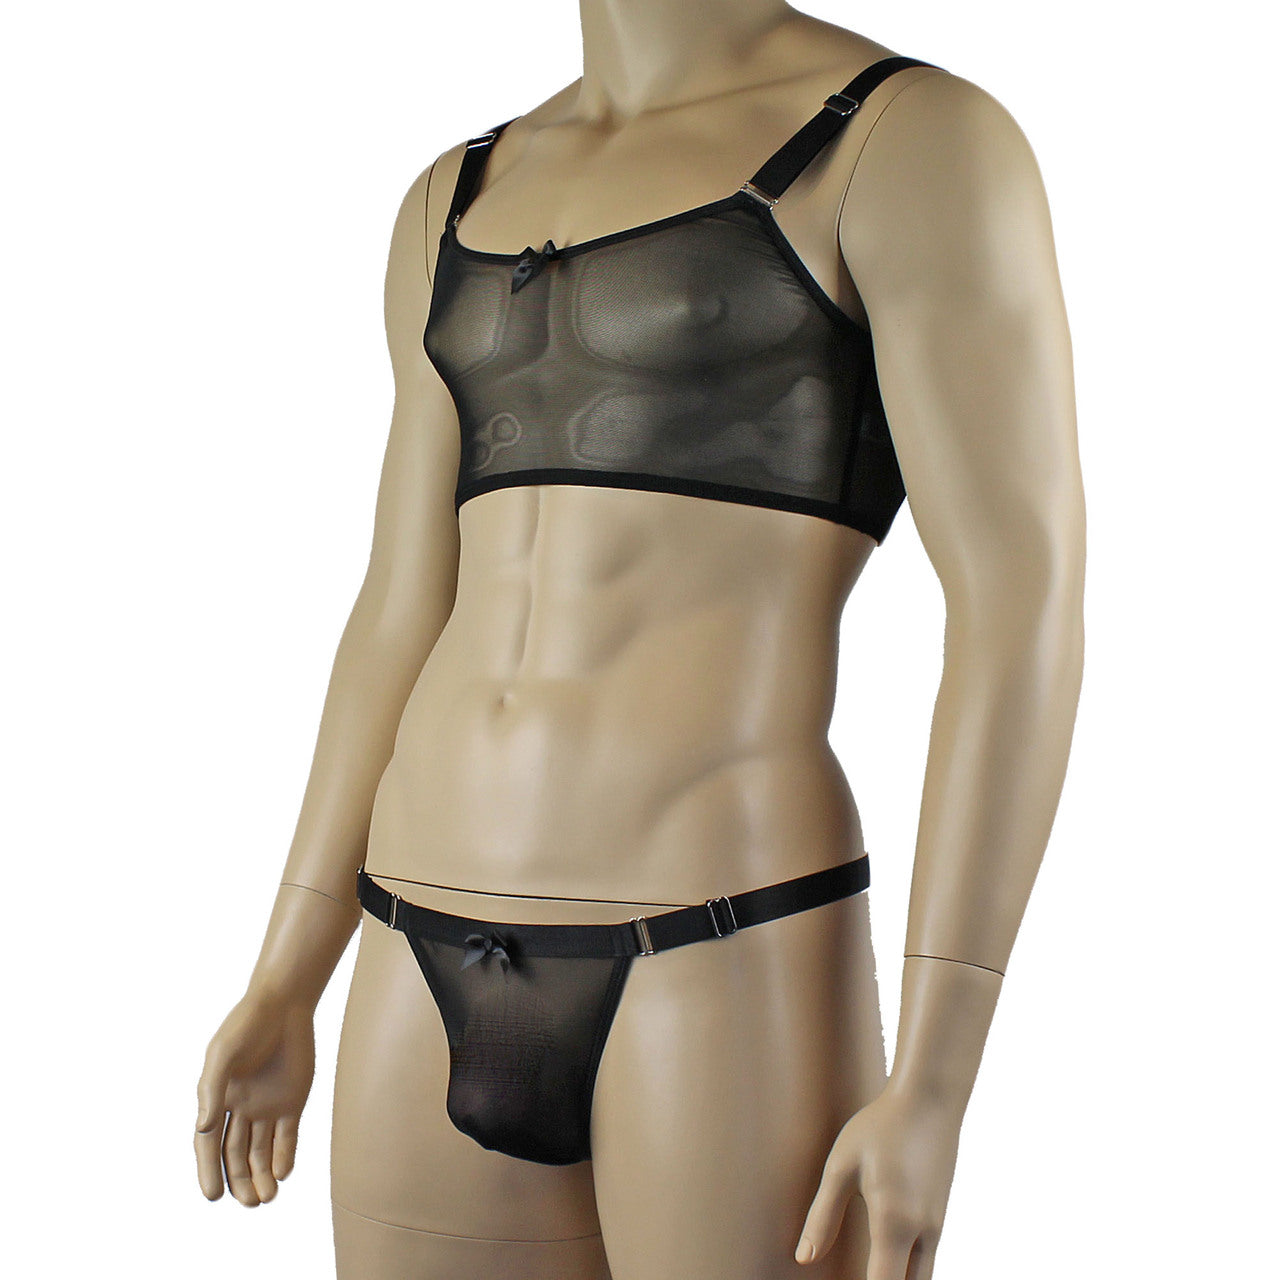 Mens Exotic Sheer Mesh Crop Bra Top Camisole & G string - Sizes up to 3XL Black